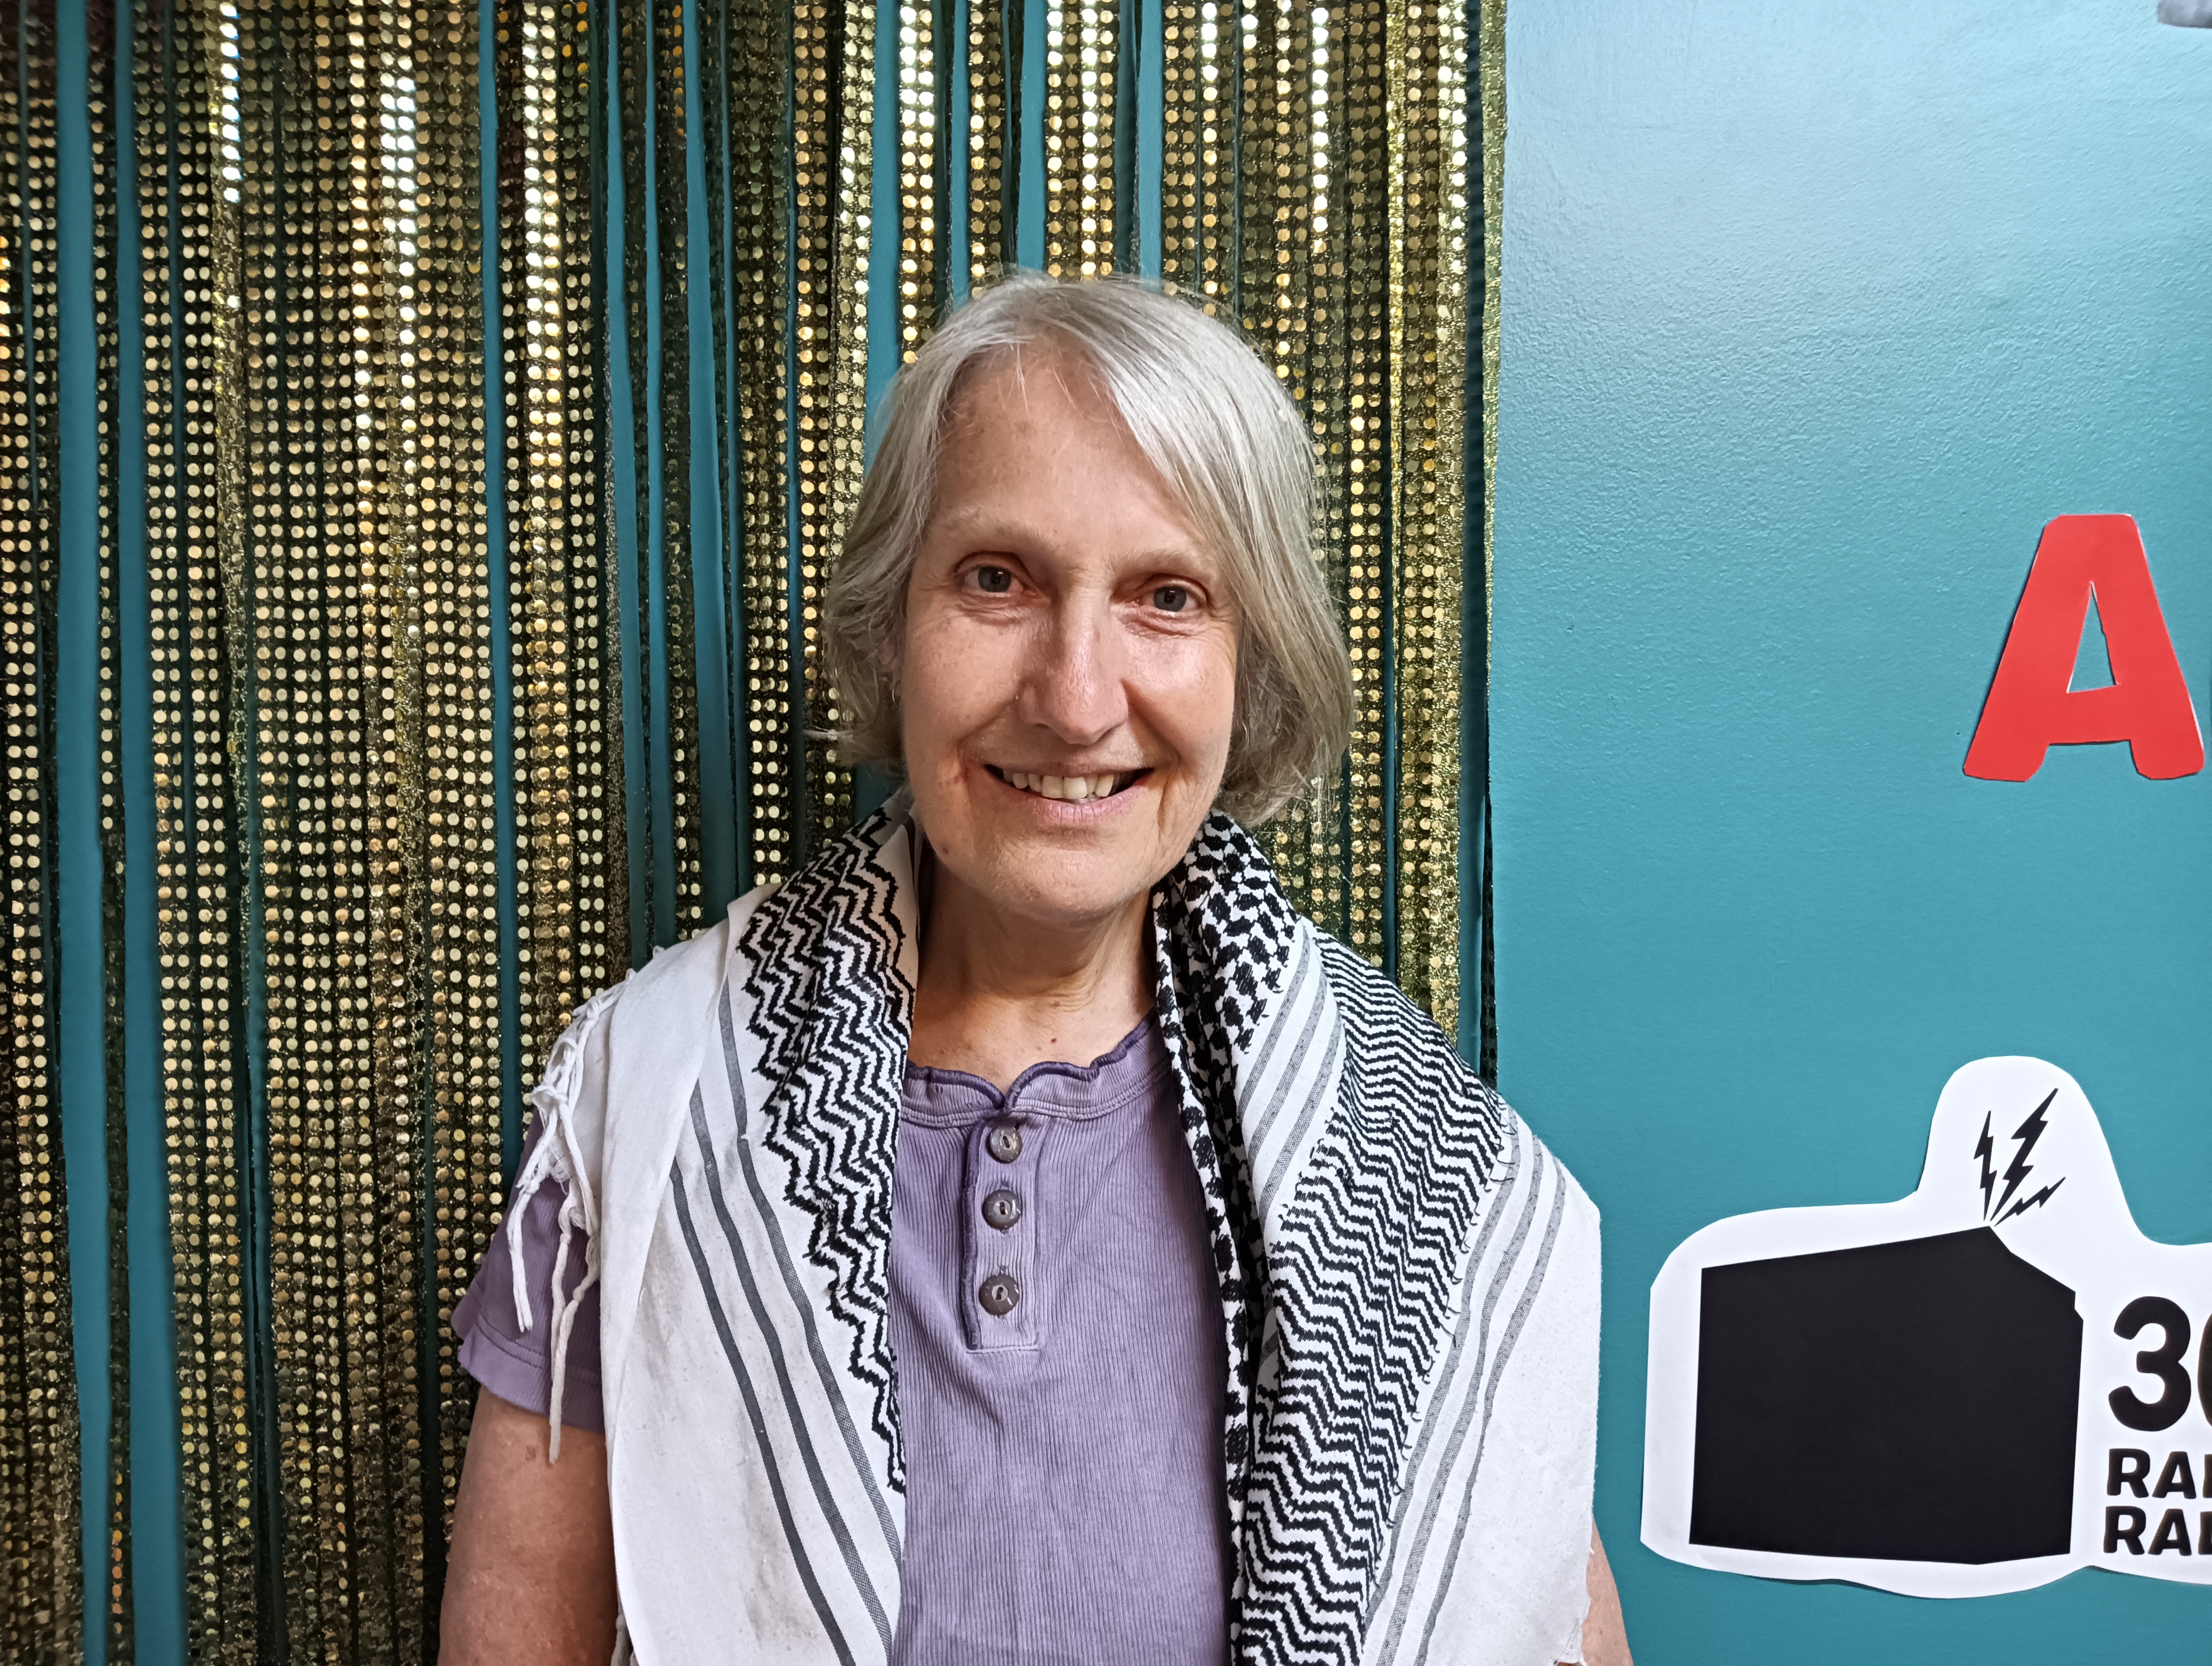 Sue stands in studio one at 3CR. Behind her is a gold sequined curtain. Sue wears a Palestinian kufiya around her shoulders.